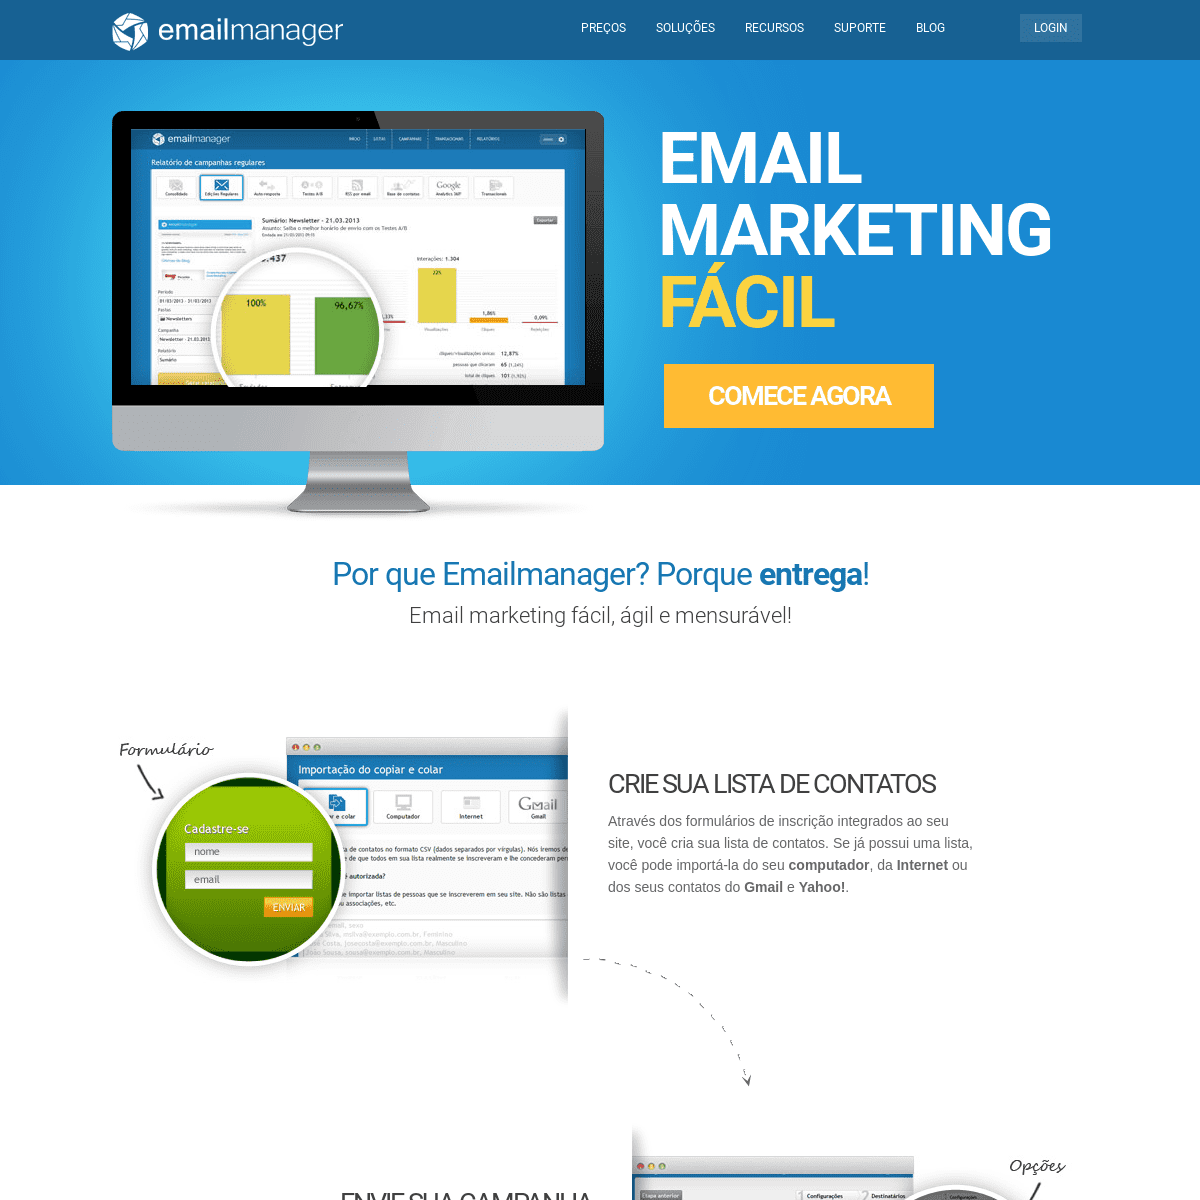 A complete backup of emailmanager.com